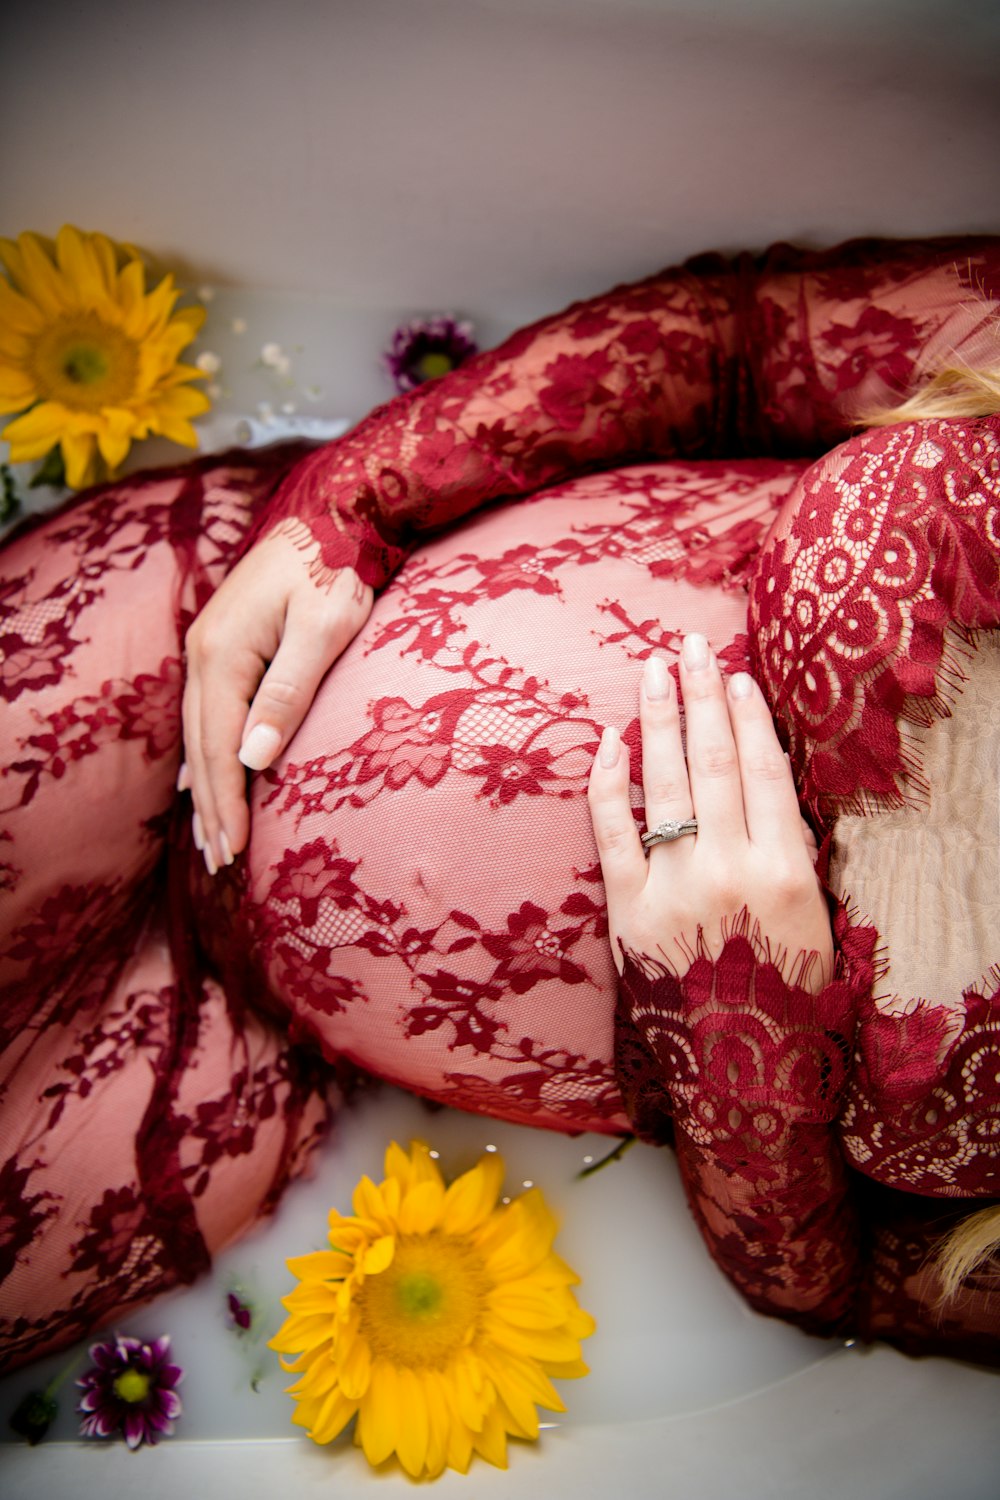 pregnant woman laying on tub with water and flowers